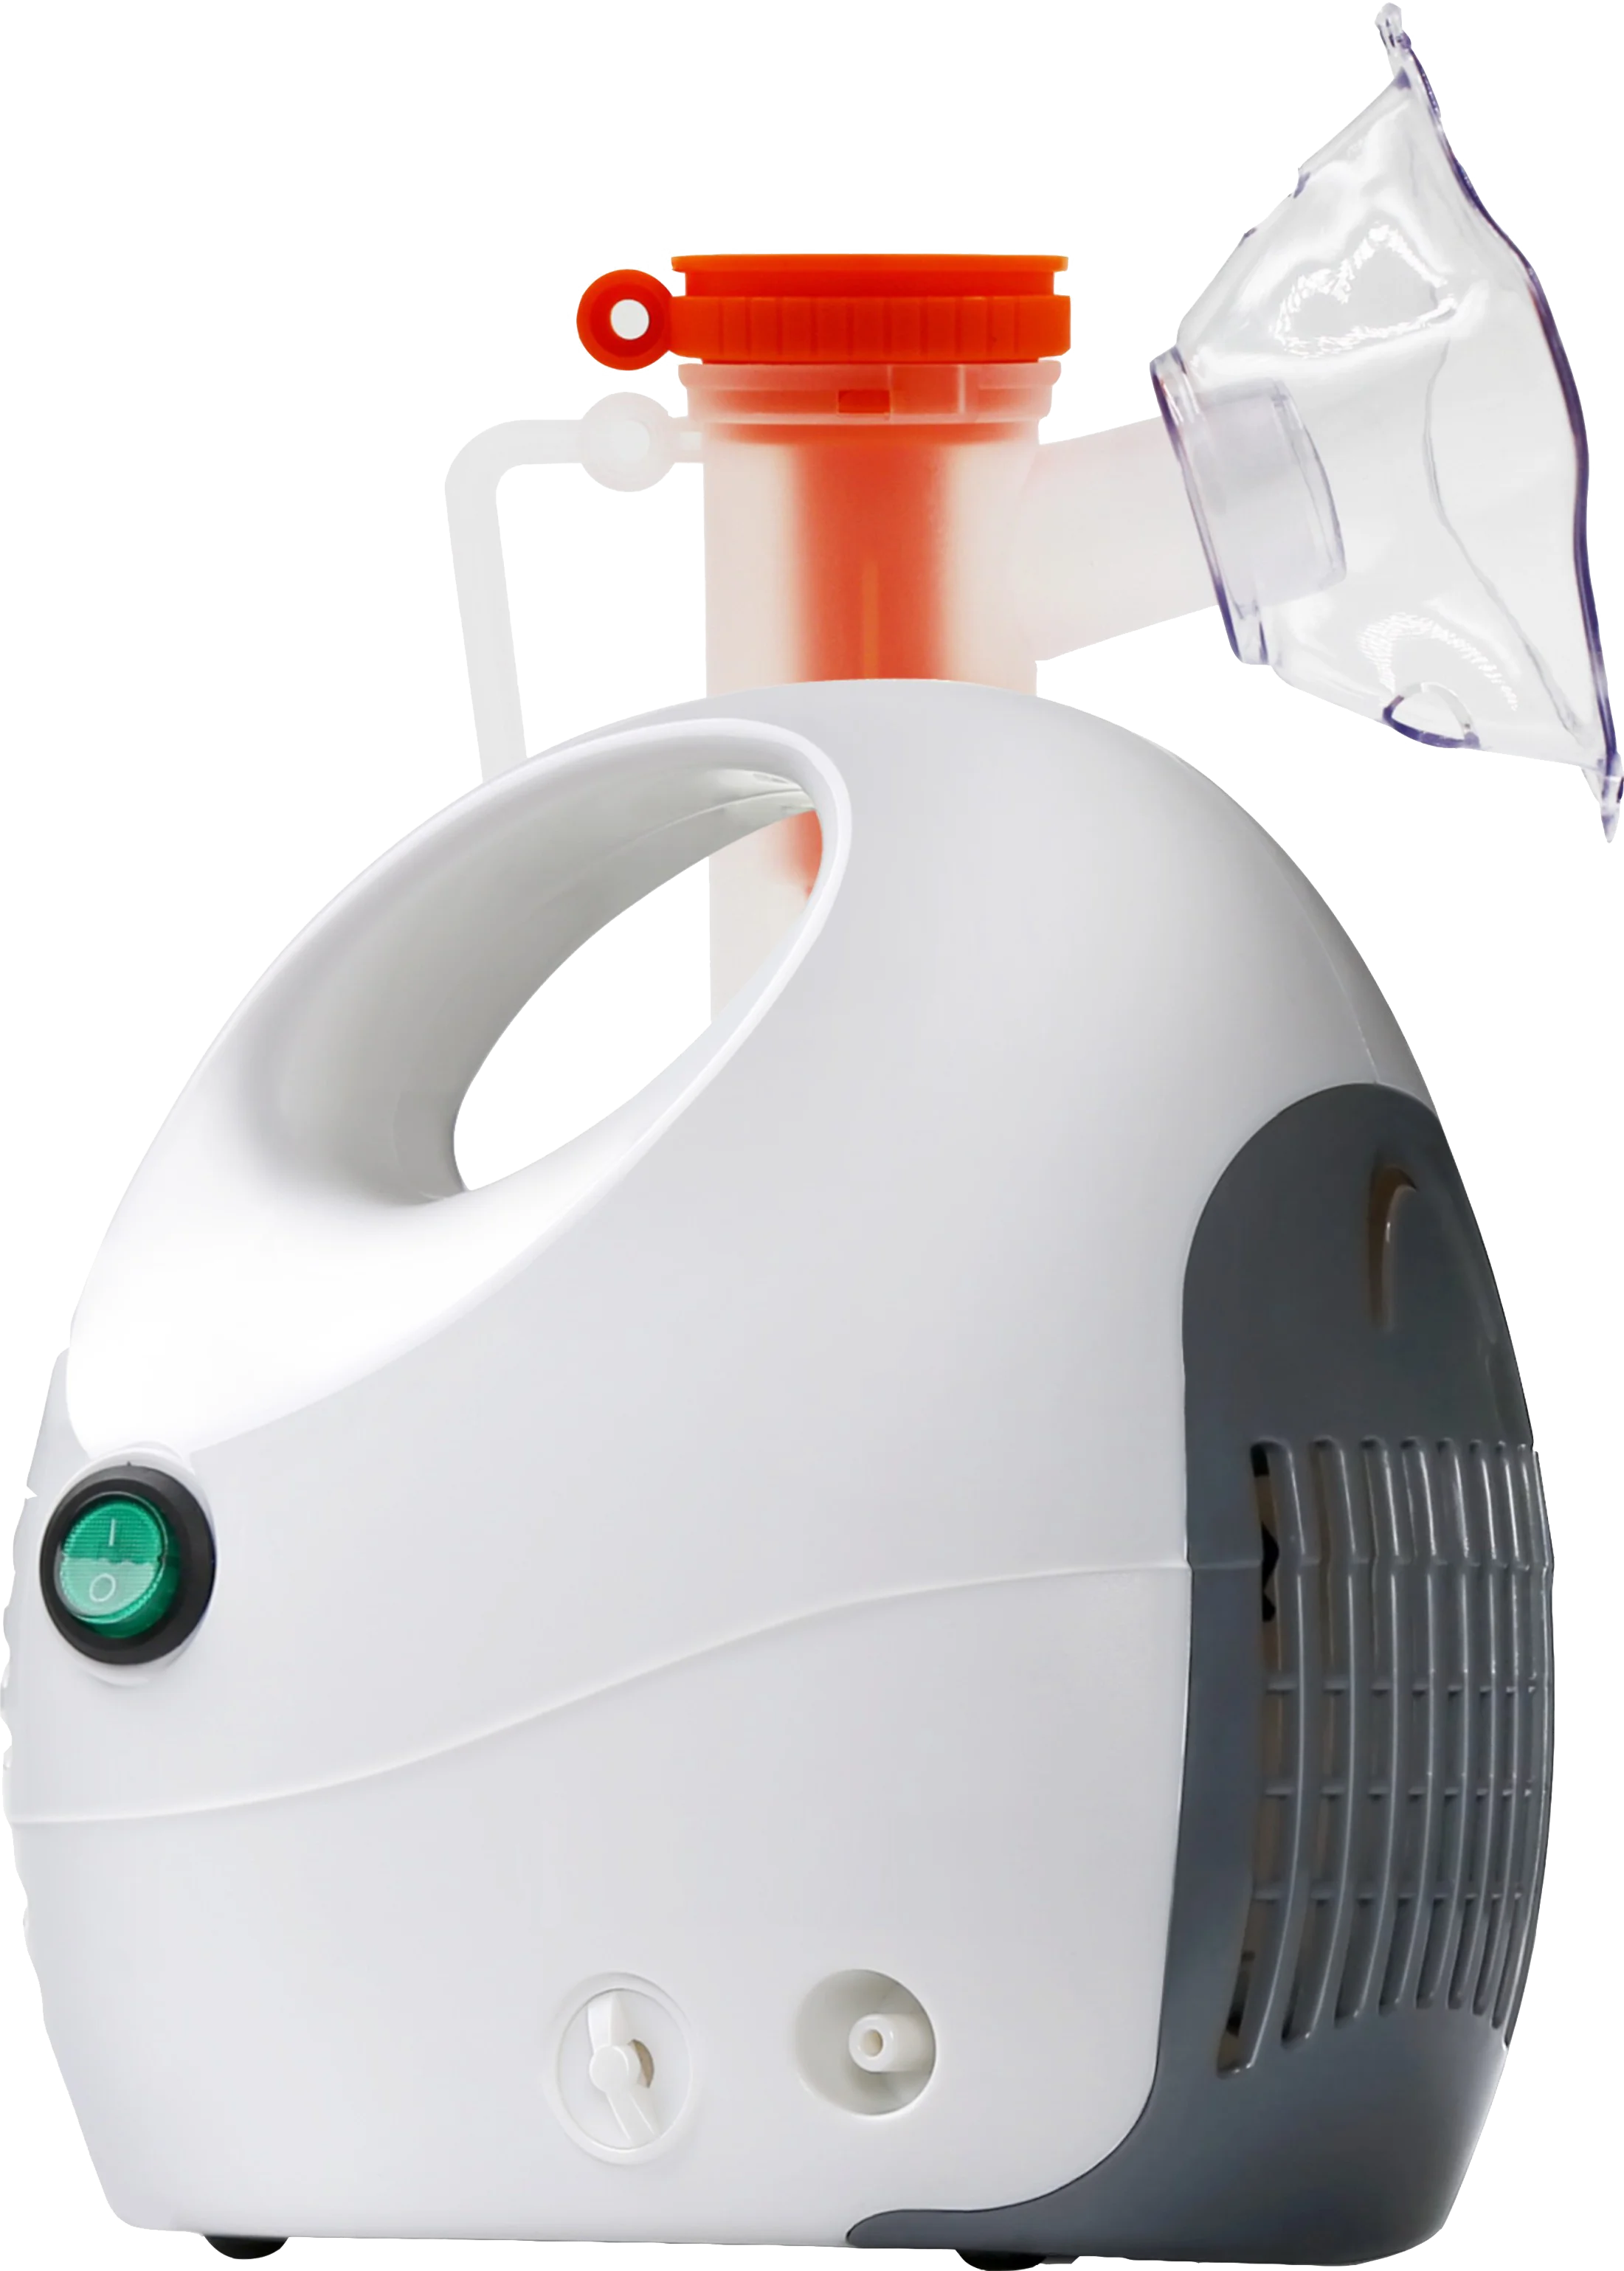 Manufacturer Oxygen Generator With Nebulizer For Home Use Low Noise Portable Compressing Nebulizer With CE ISO Certifications